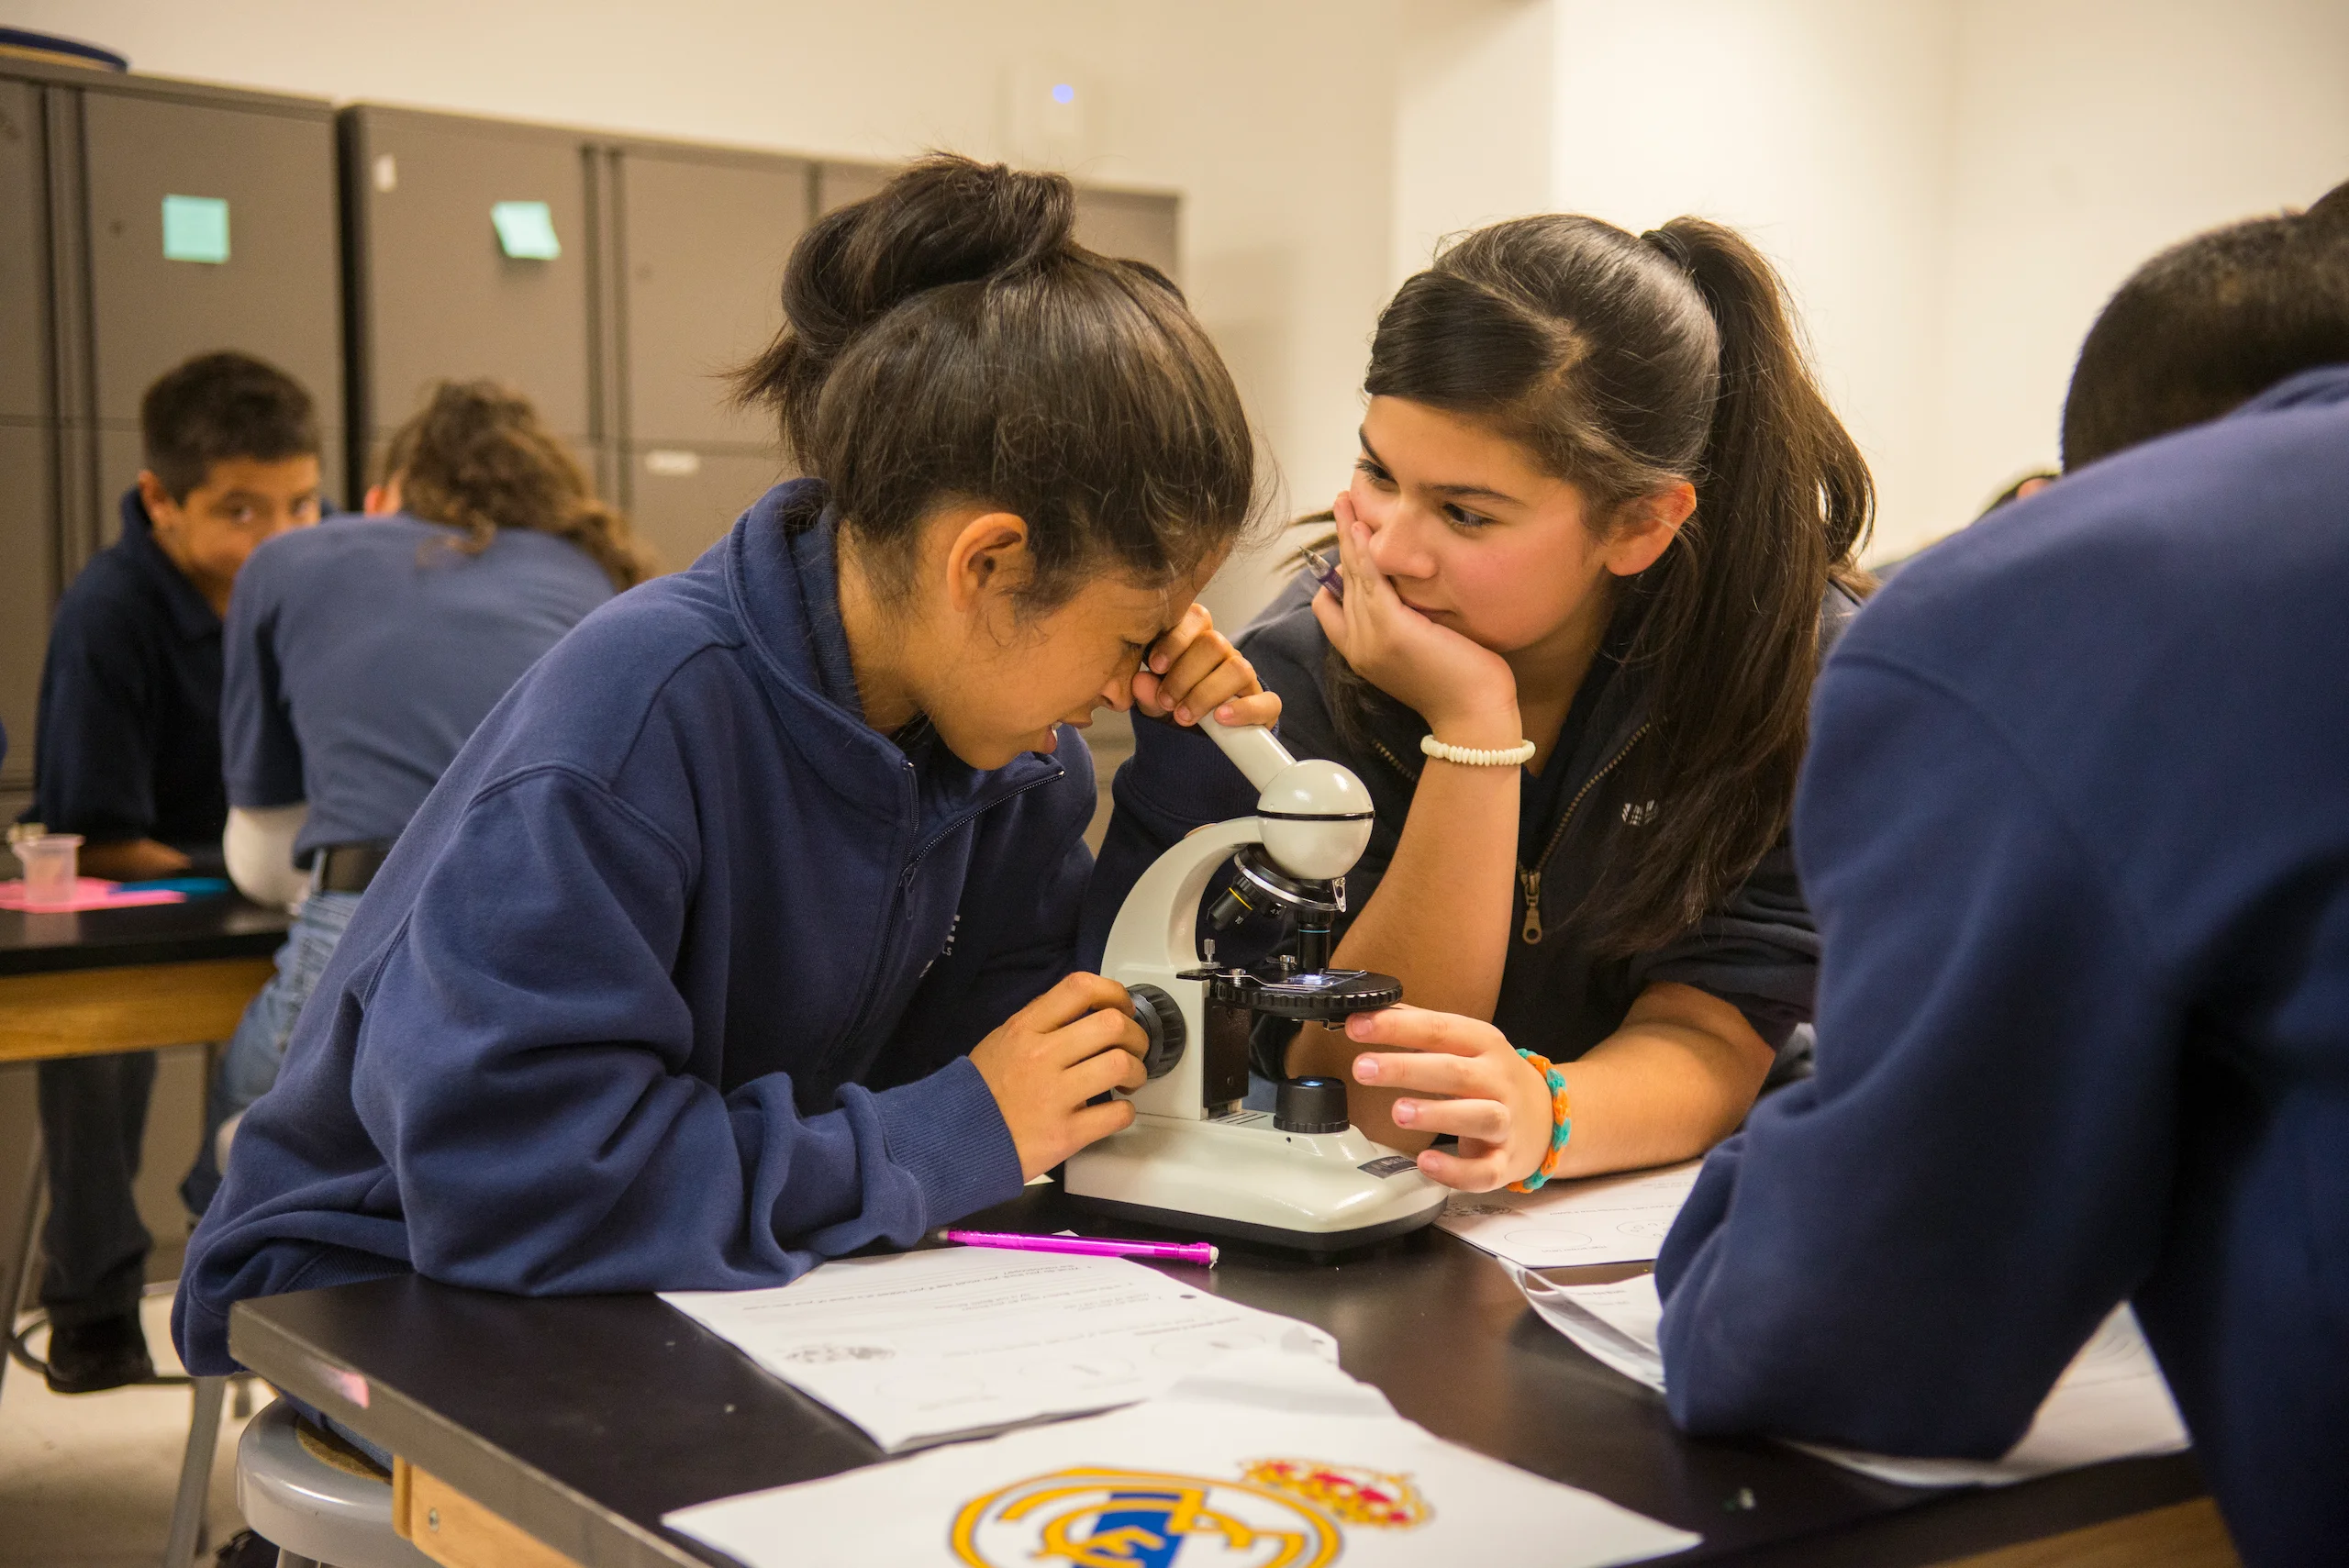 Students with the microscope